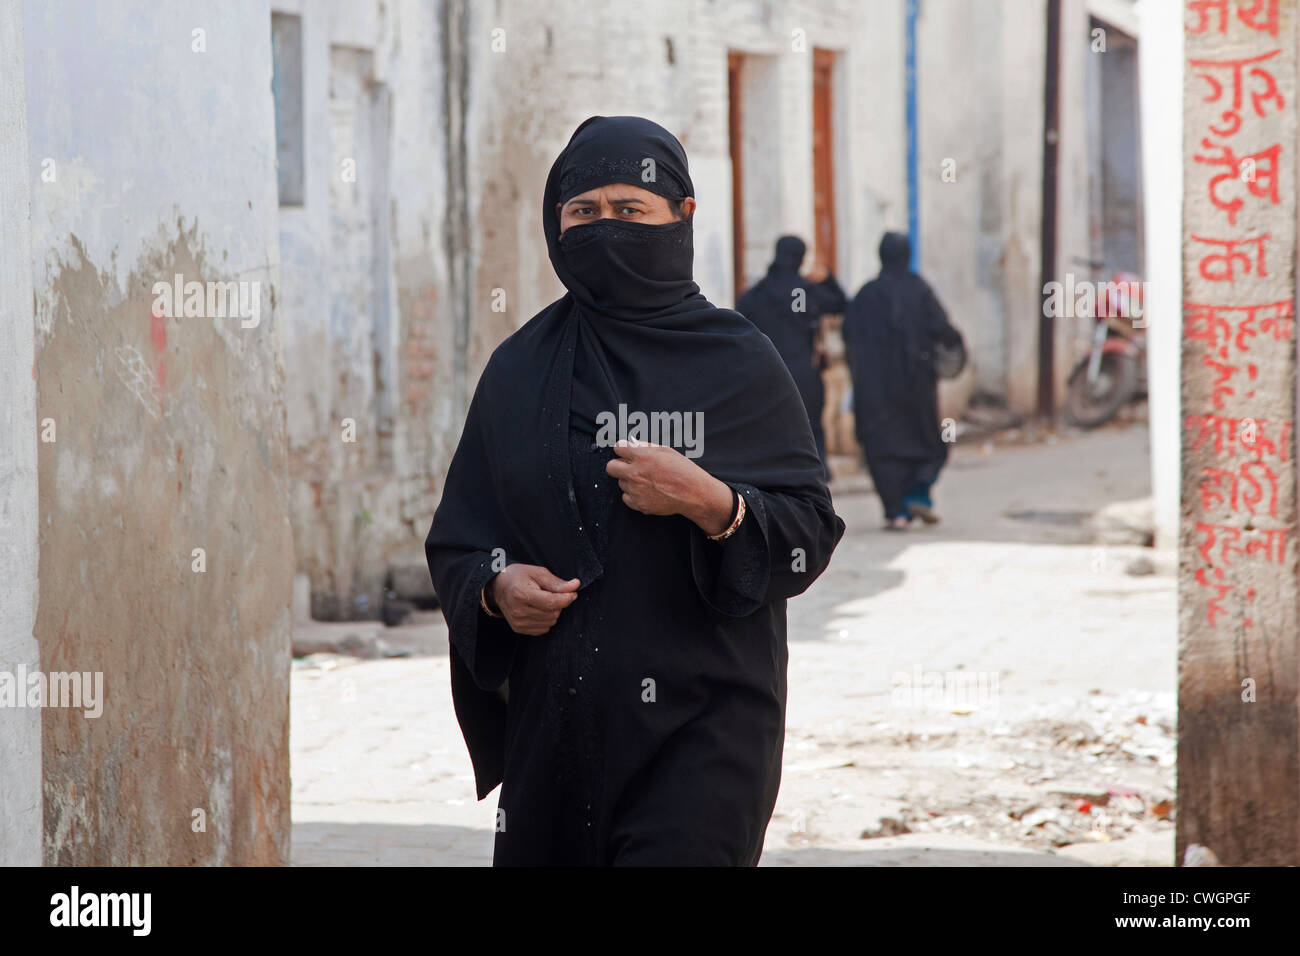 Muslim woman, covered completely in black burqa, walking the streets of Agra, Uttar Pradesh, India Stock Photo